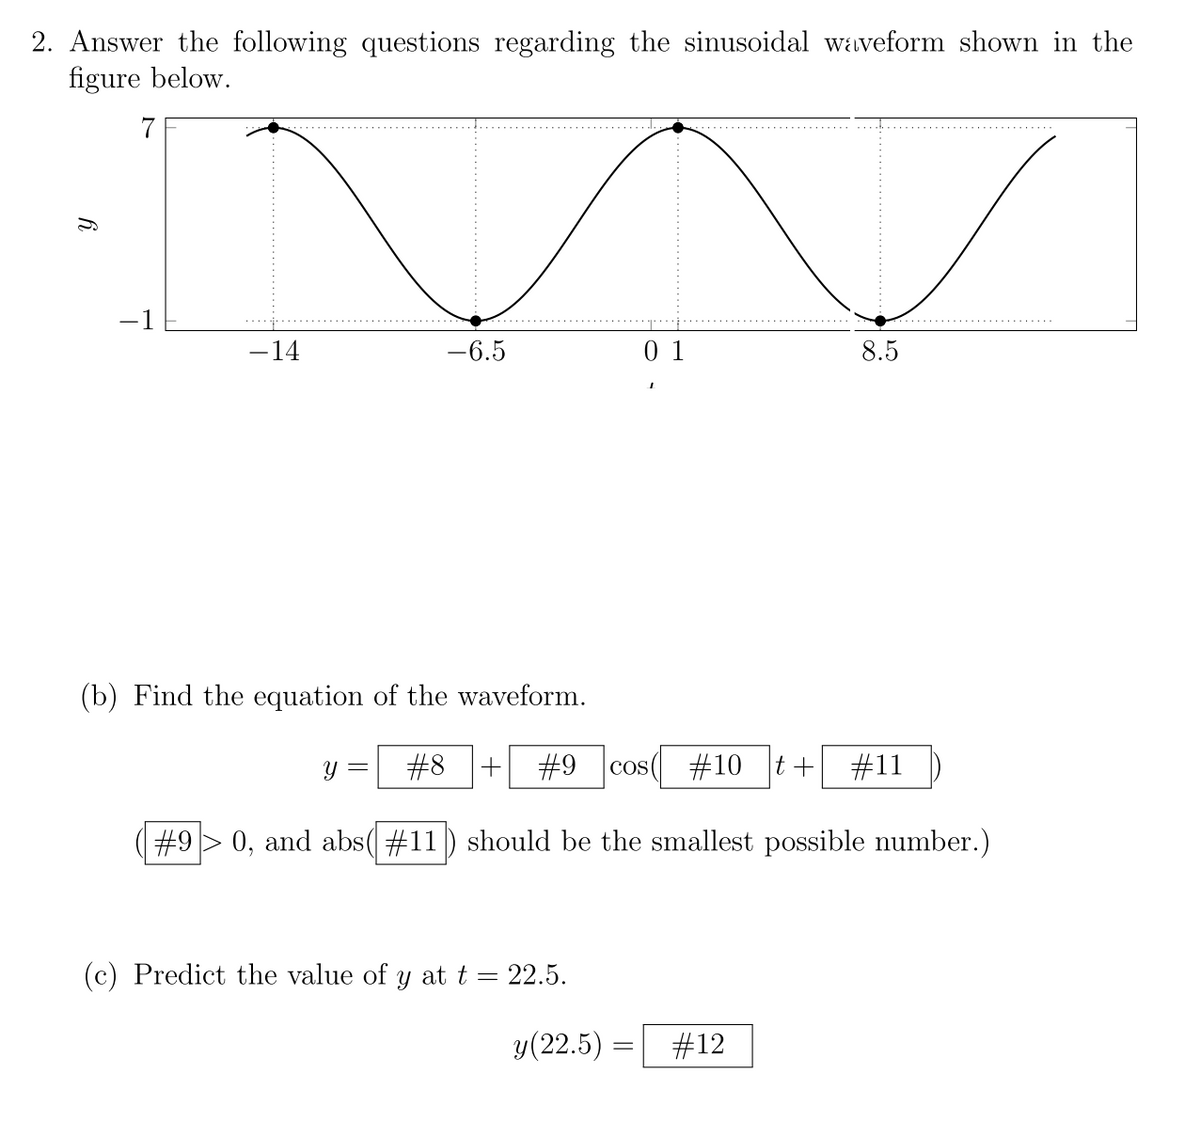 2. Answer the following questions regarding the sinusoidal waveform shown in the
figure below.
h
7
L
-14
-6.5
(b) Find the equation of the waveform.
01
(c) Predict the value of y at t = 22.5.
y = #8 + #9 COS #10 t+ #11
#9 0, and abs (#11) should be the smallest possible number.)
8.5
y (22.5) = #12